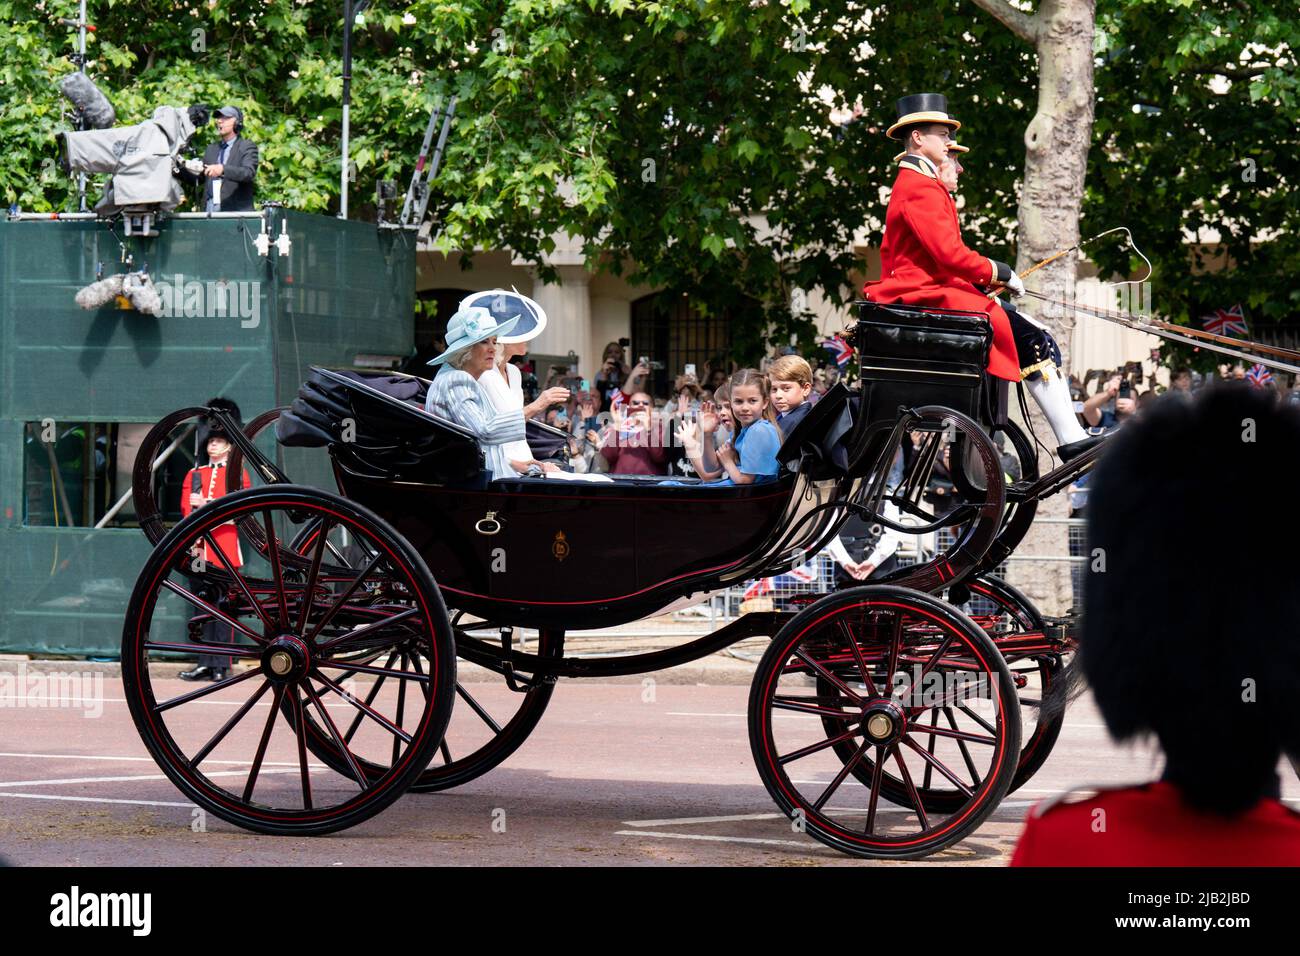 London, UK. 24th May, 2022. Camilla Duchess of Cornwall, Katherine Duchess of Cambridge, George, Charlotte and Louis travel down the mall in a horse drawn carage to celebrate the Platinum Jubilee of Queen Elizabeth 11 in London, United Kingdom on 5/24/2022. (Photo by Richard Washbrooke/News Images/Sipa USA) Credit: Sipa USA/Alamy Live News Stock Photo